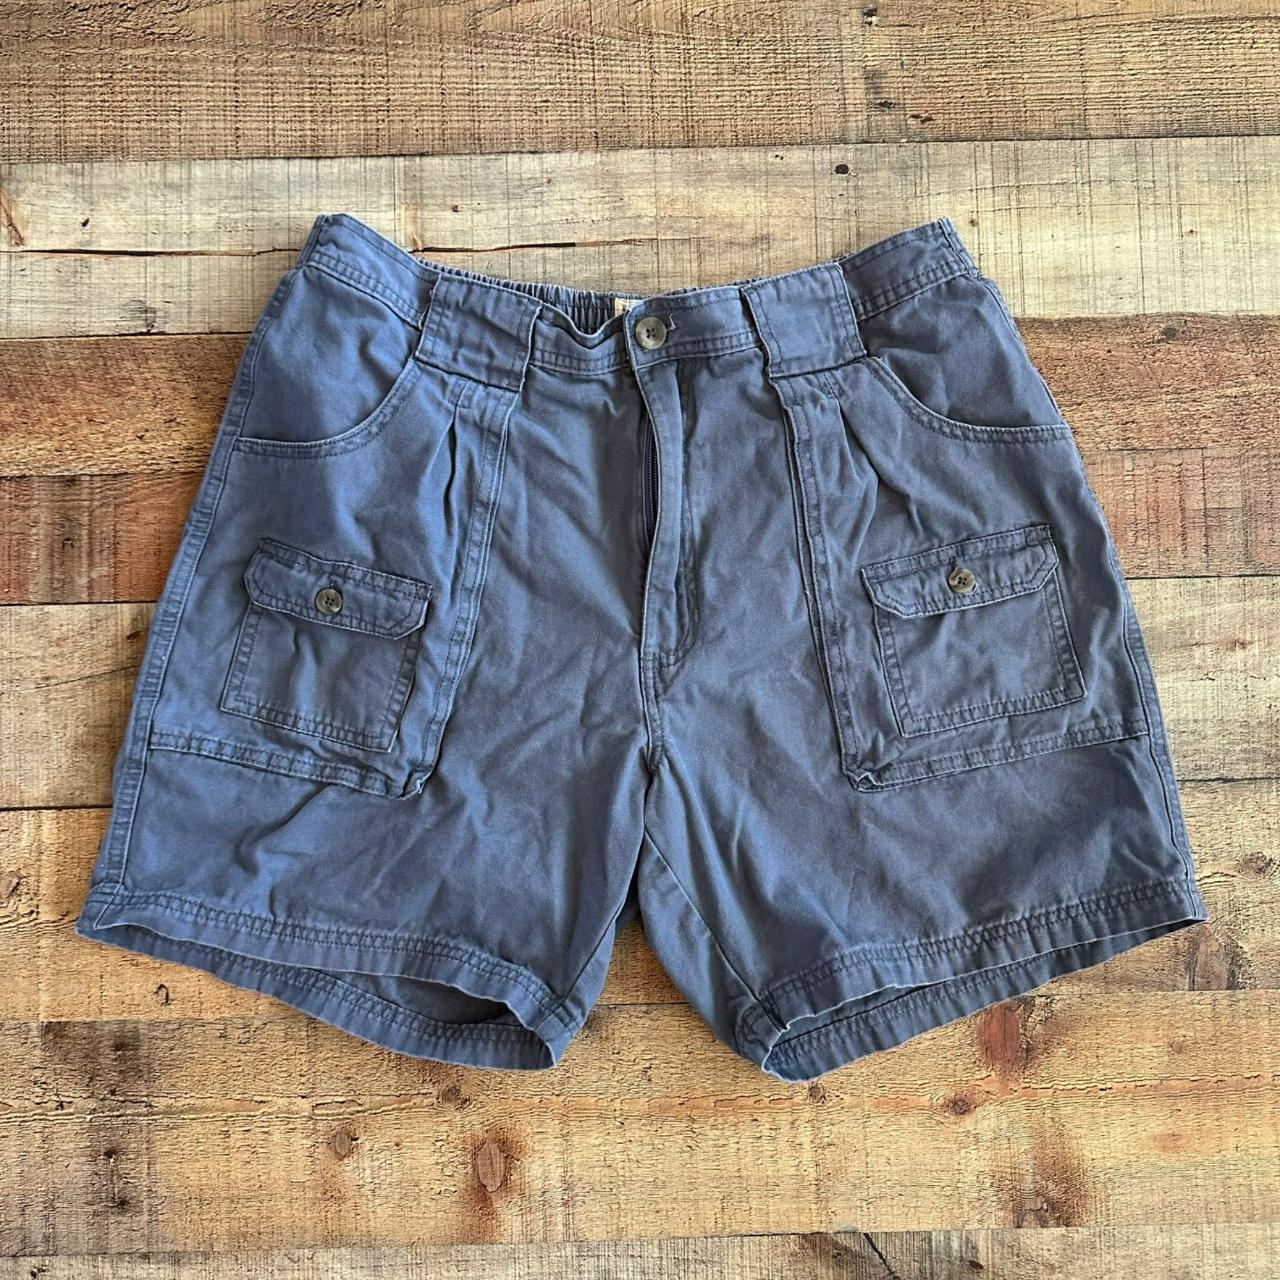 Red Head men's gray cargo shorts -38 There are no... - Depop